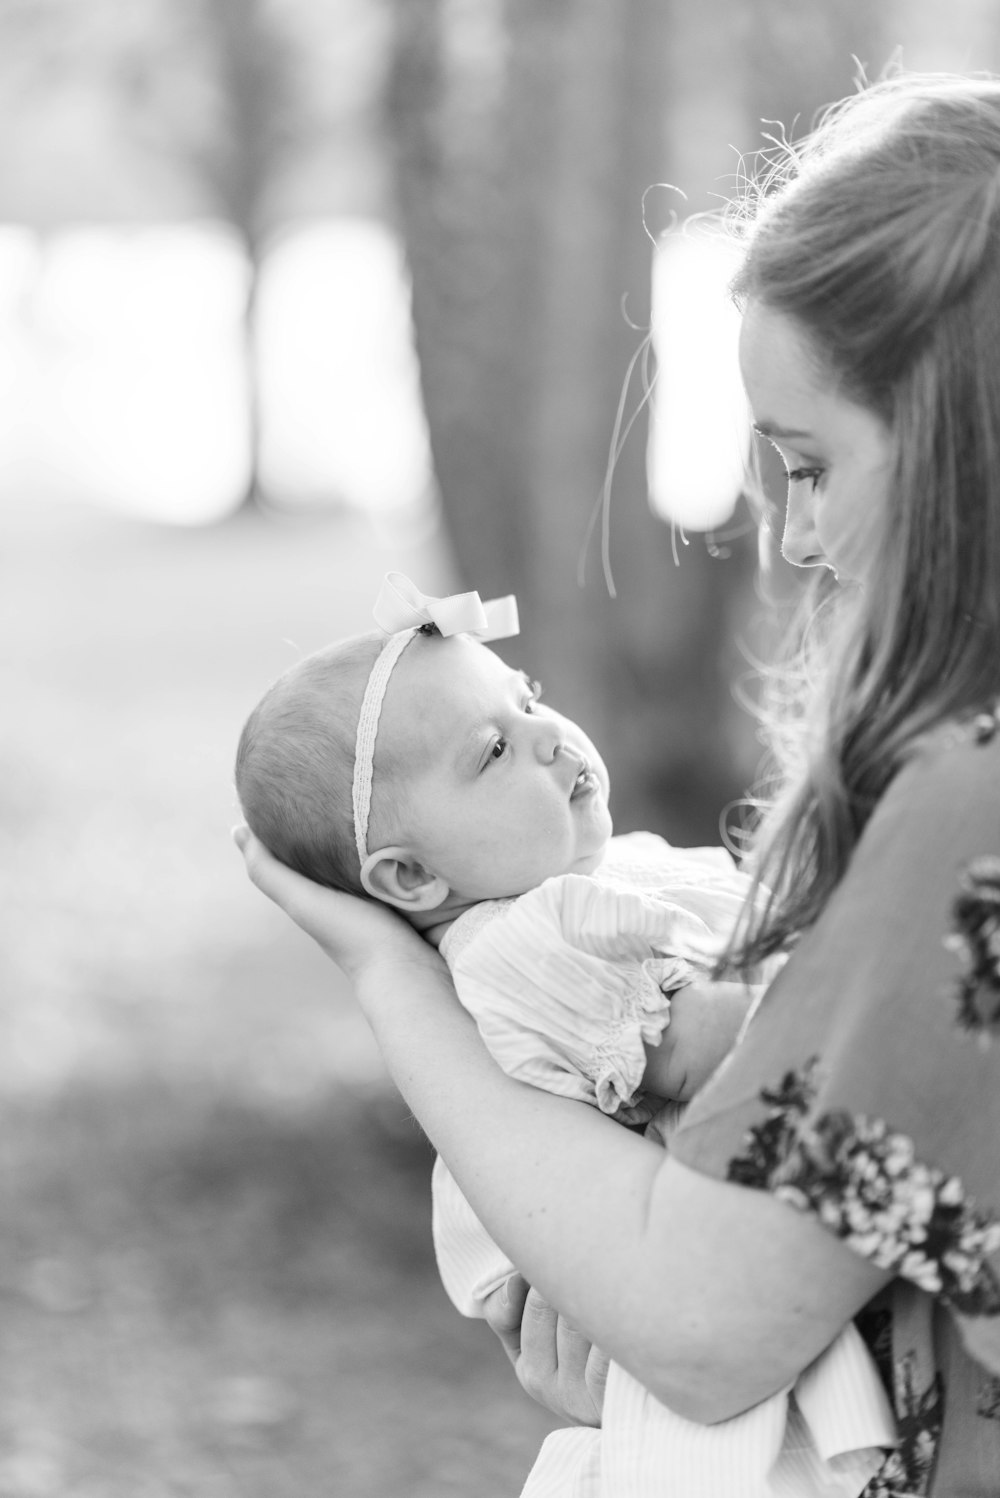 greyscale selective focus photo of woman carrying baby